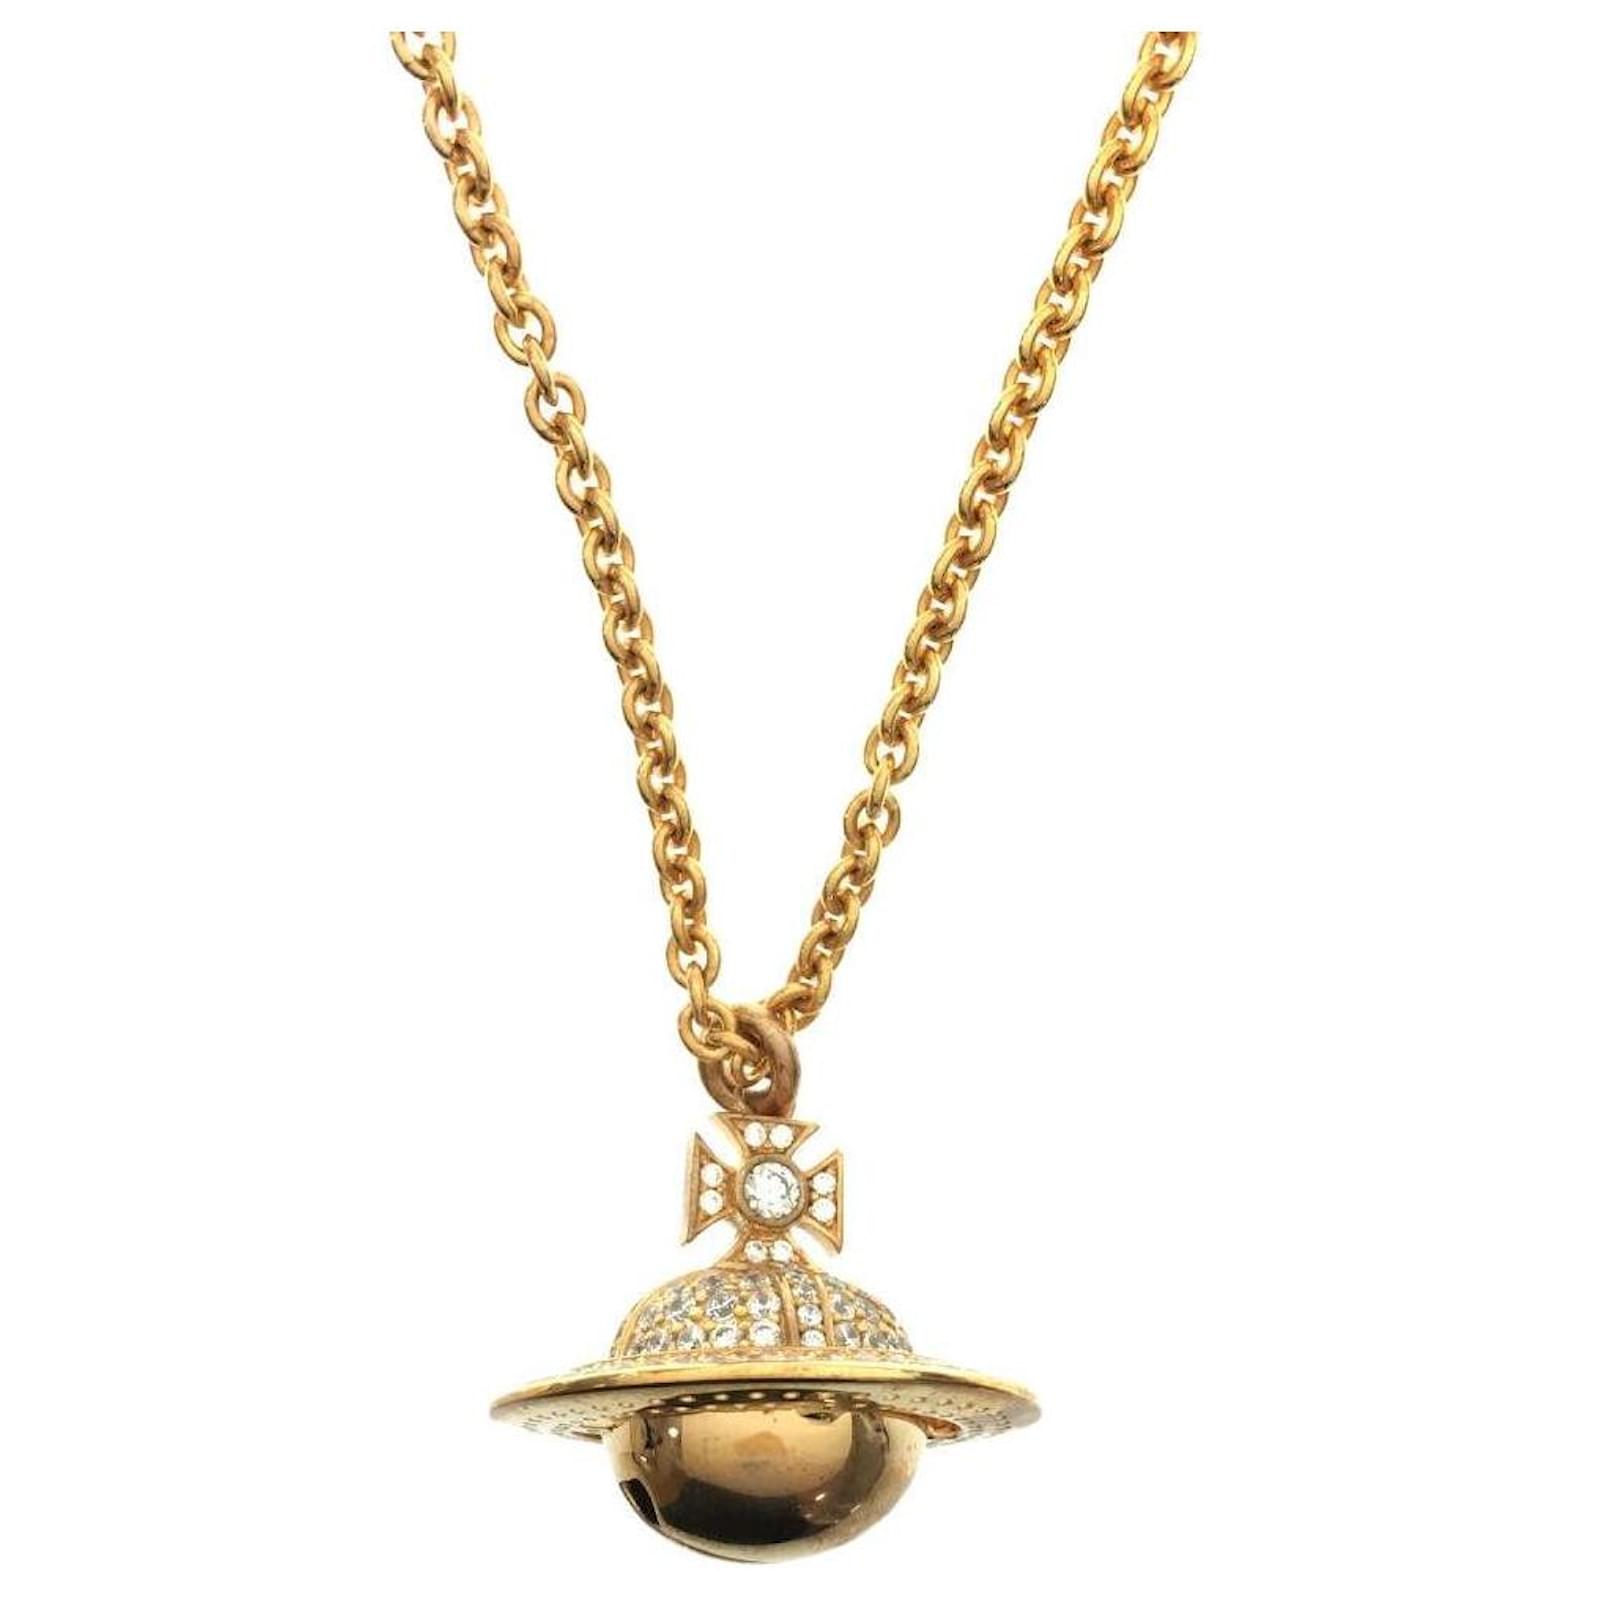 Buy [Vivienne Westwood] Vivienne Westwood TINY Orb Necklace 752014B / 2  [Parallel imports] from Japan - Buy authentic Plus exclusive items from  Japan | ZenPlus